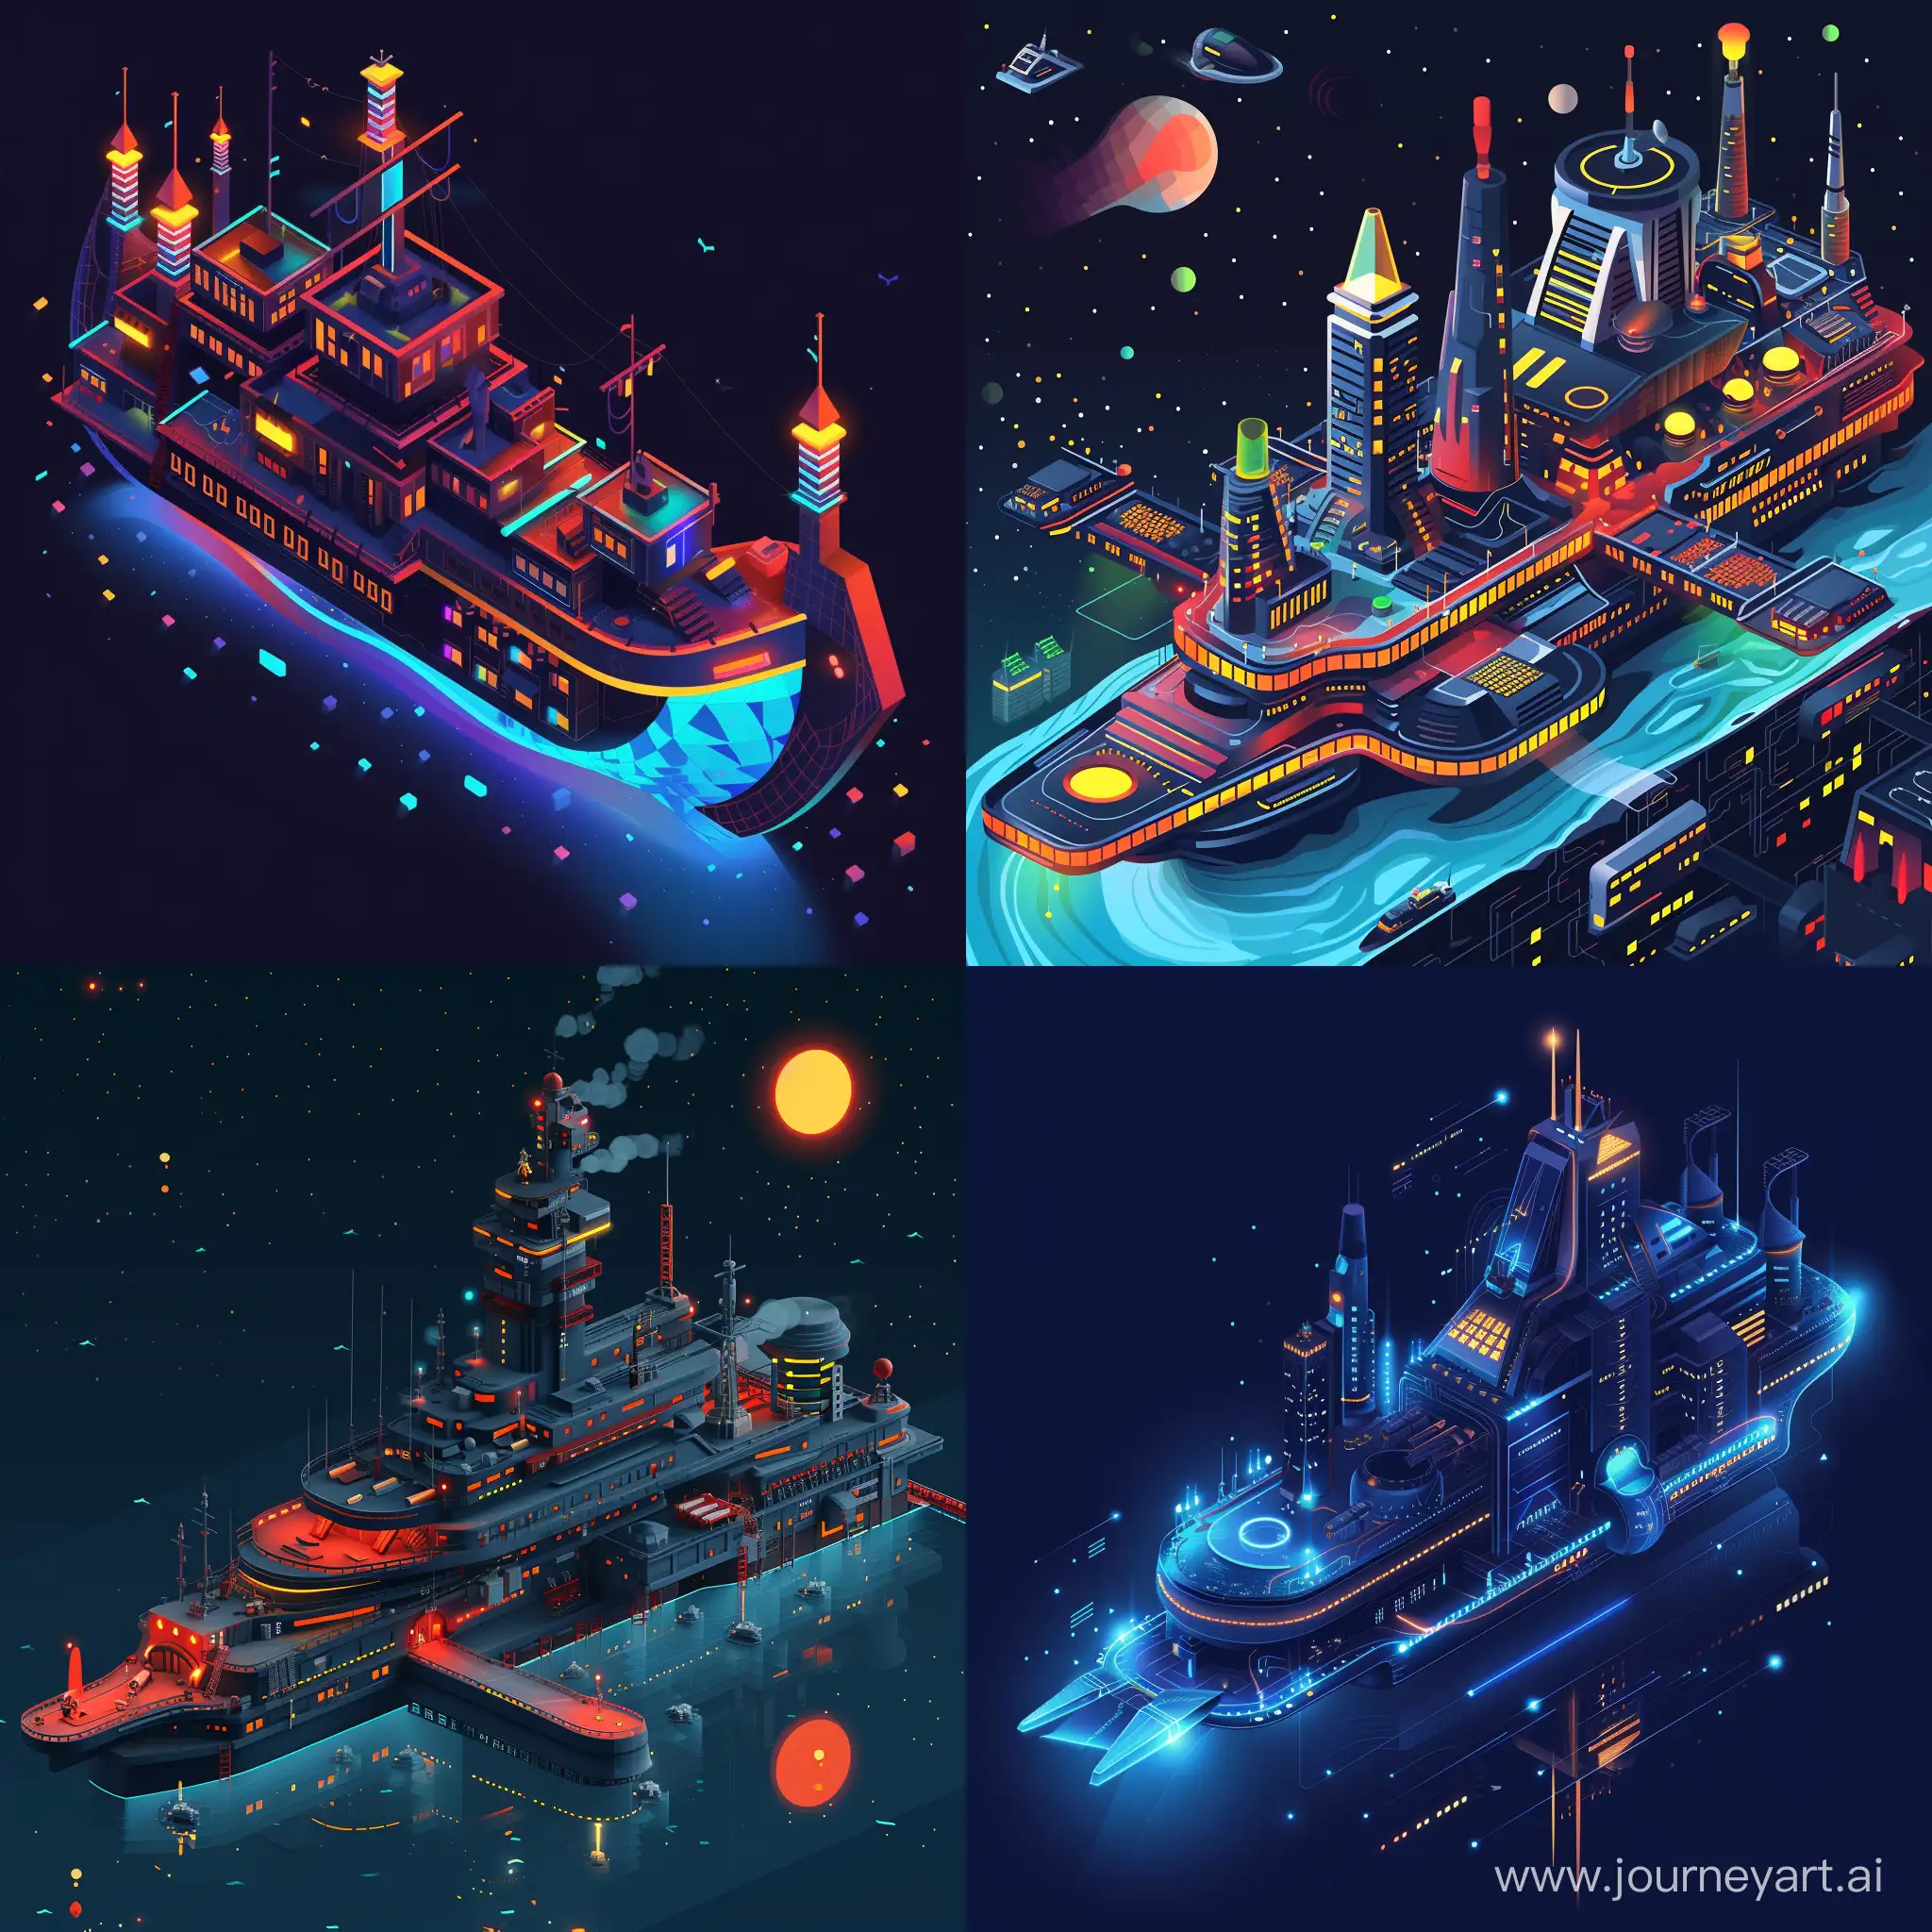 night city on a ship in isometry in vector style, high quality details